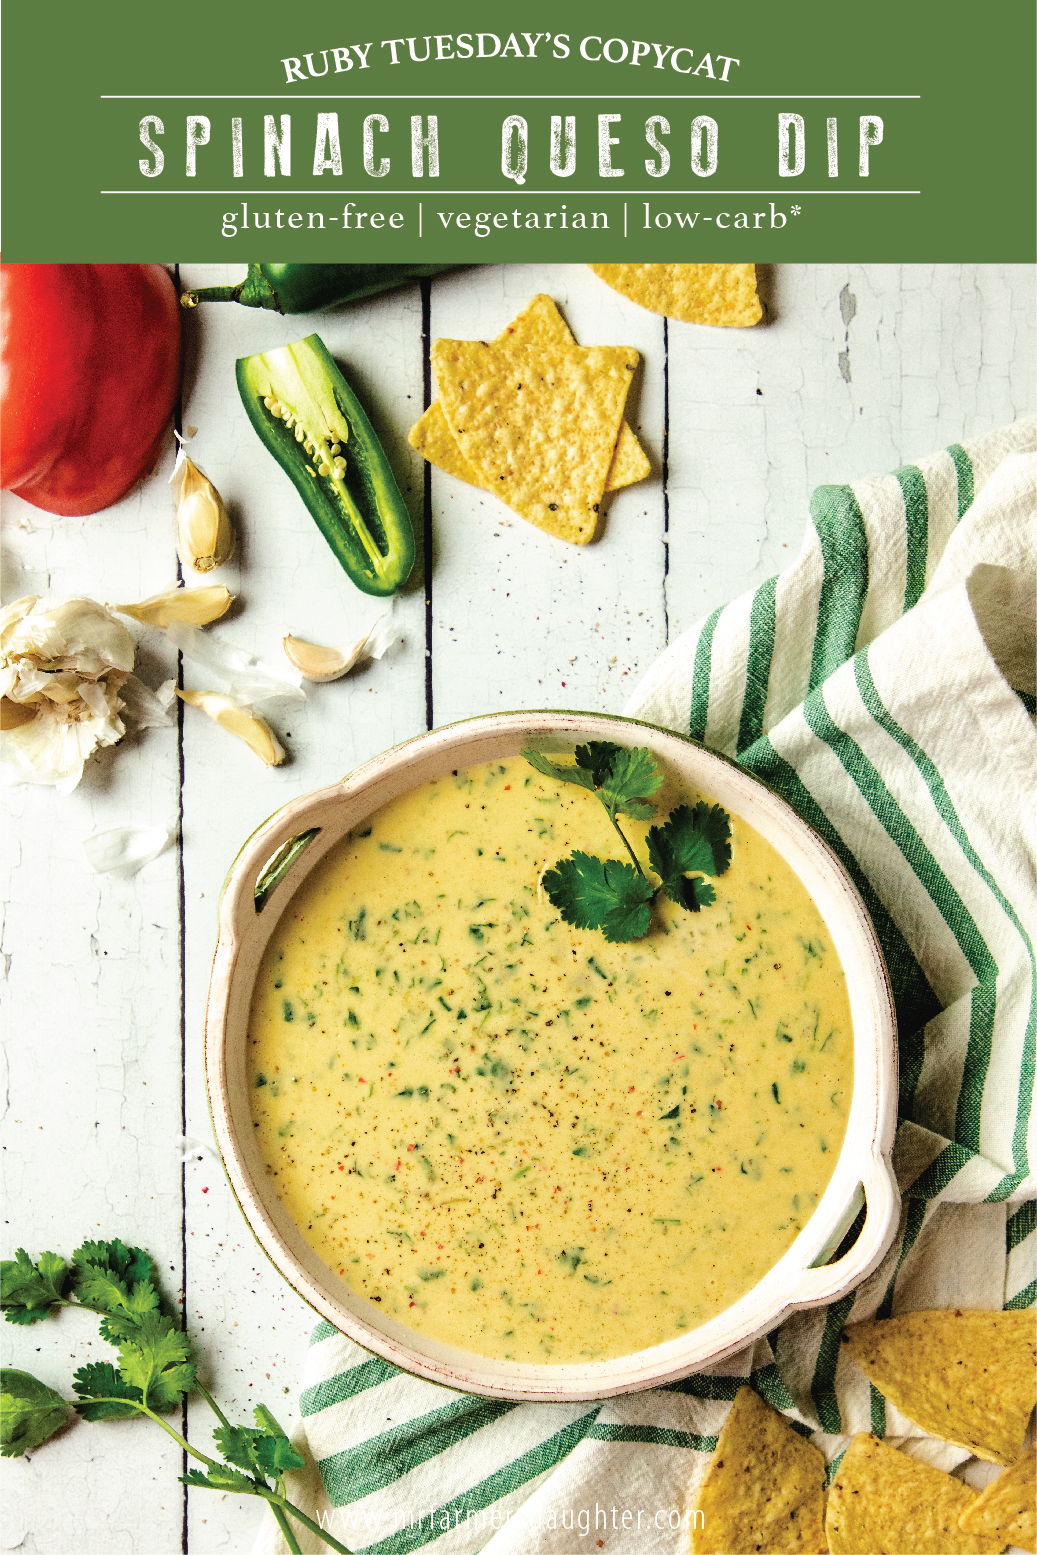 Queso dip, Mexican, cheesy, appetizer, pepperjack, cheese dip, spicy, gluten-free, vegetarian, spinach, cilantro, chilis, peppers